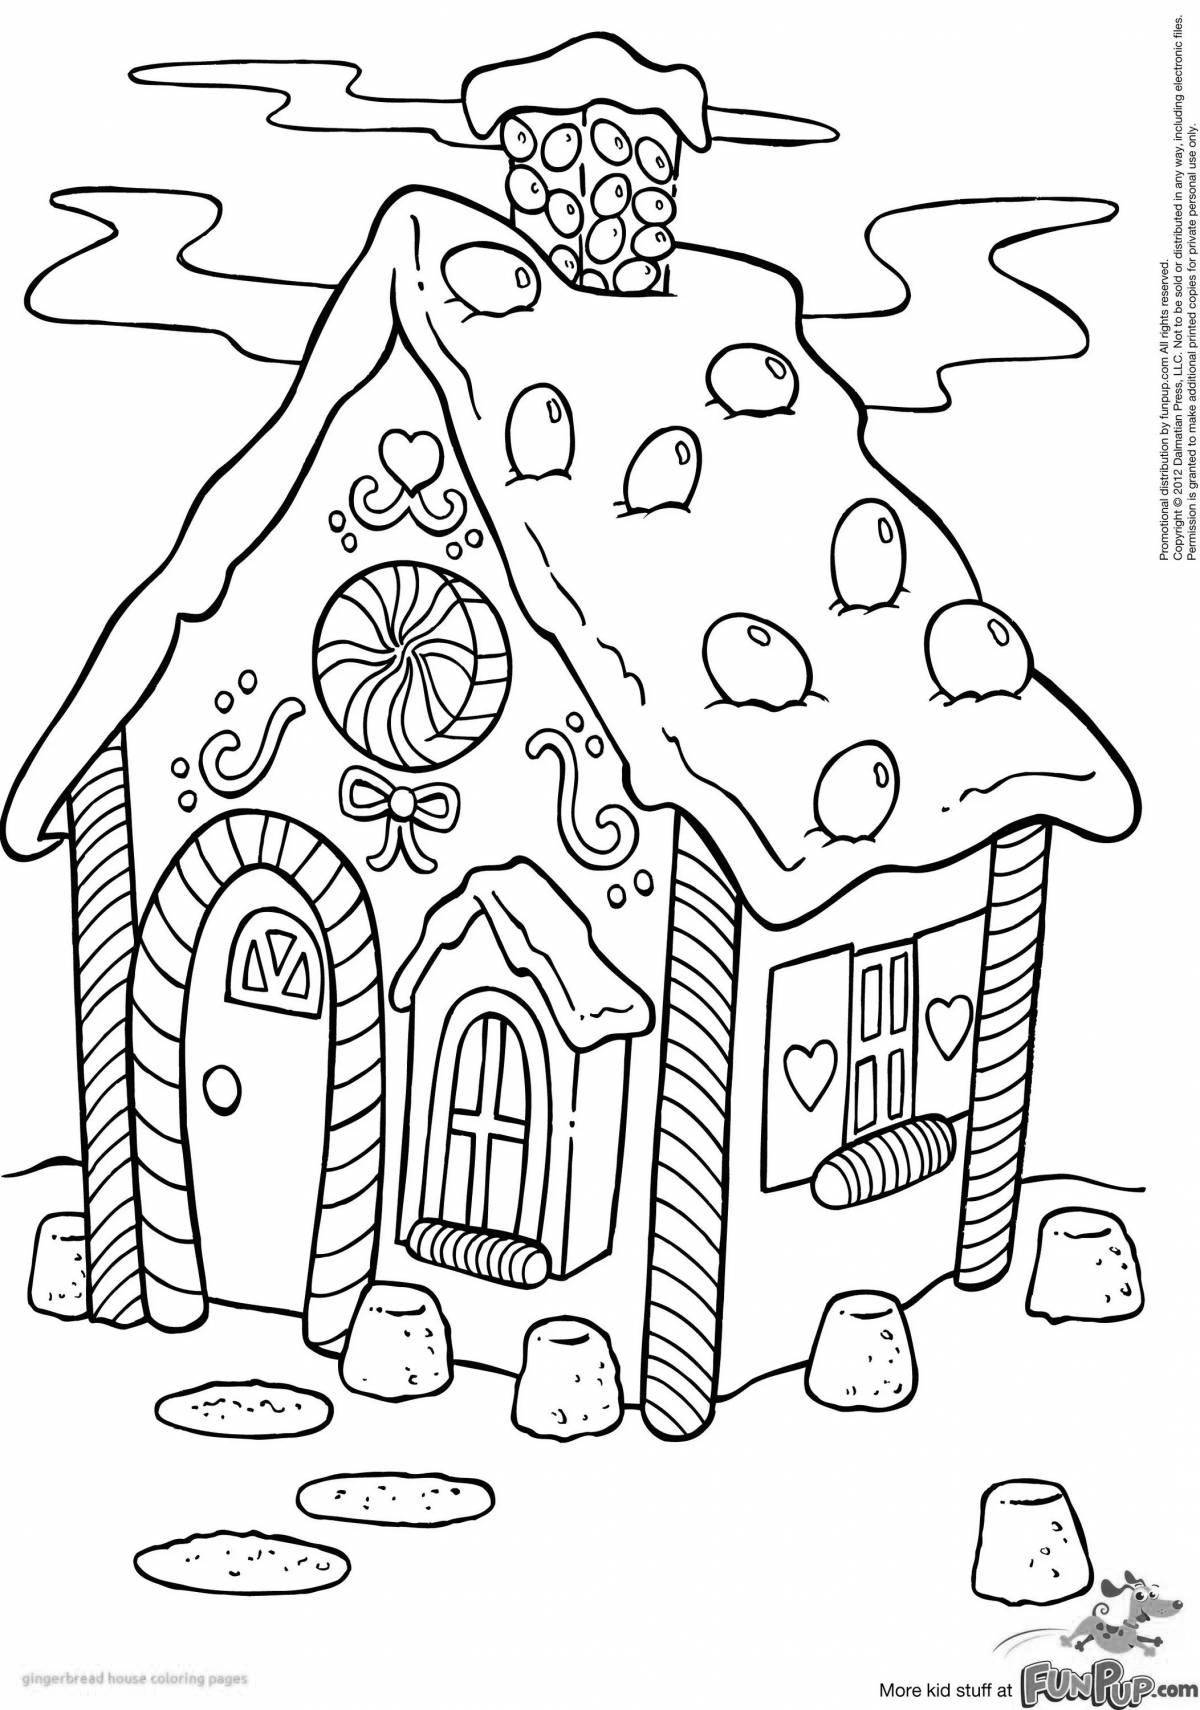 Fabulous gingerbread house coloring book